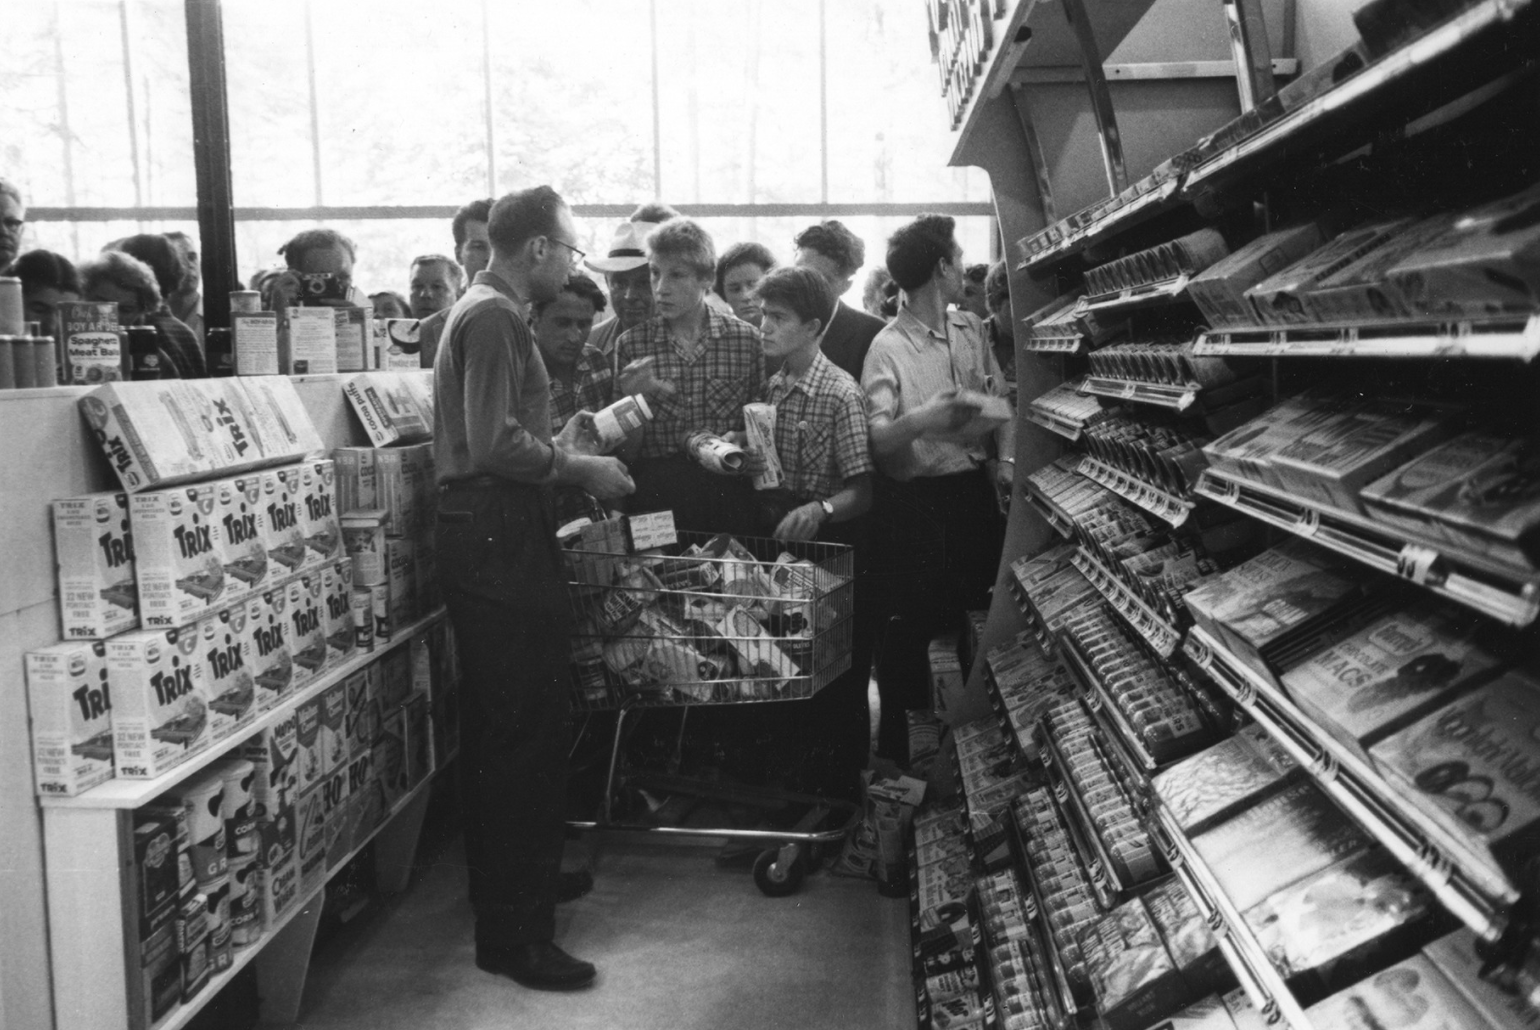 Soviet observers are being shown what a supermarket looks like. Getty Images